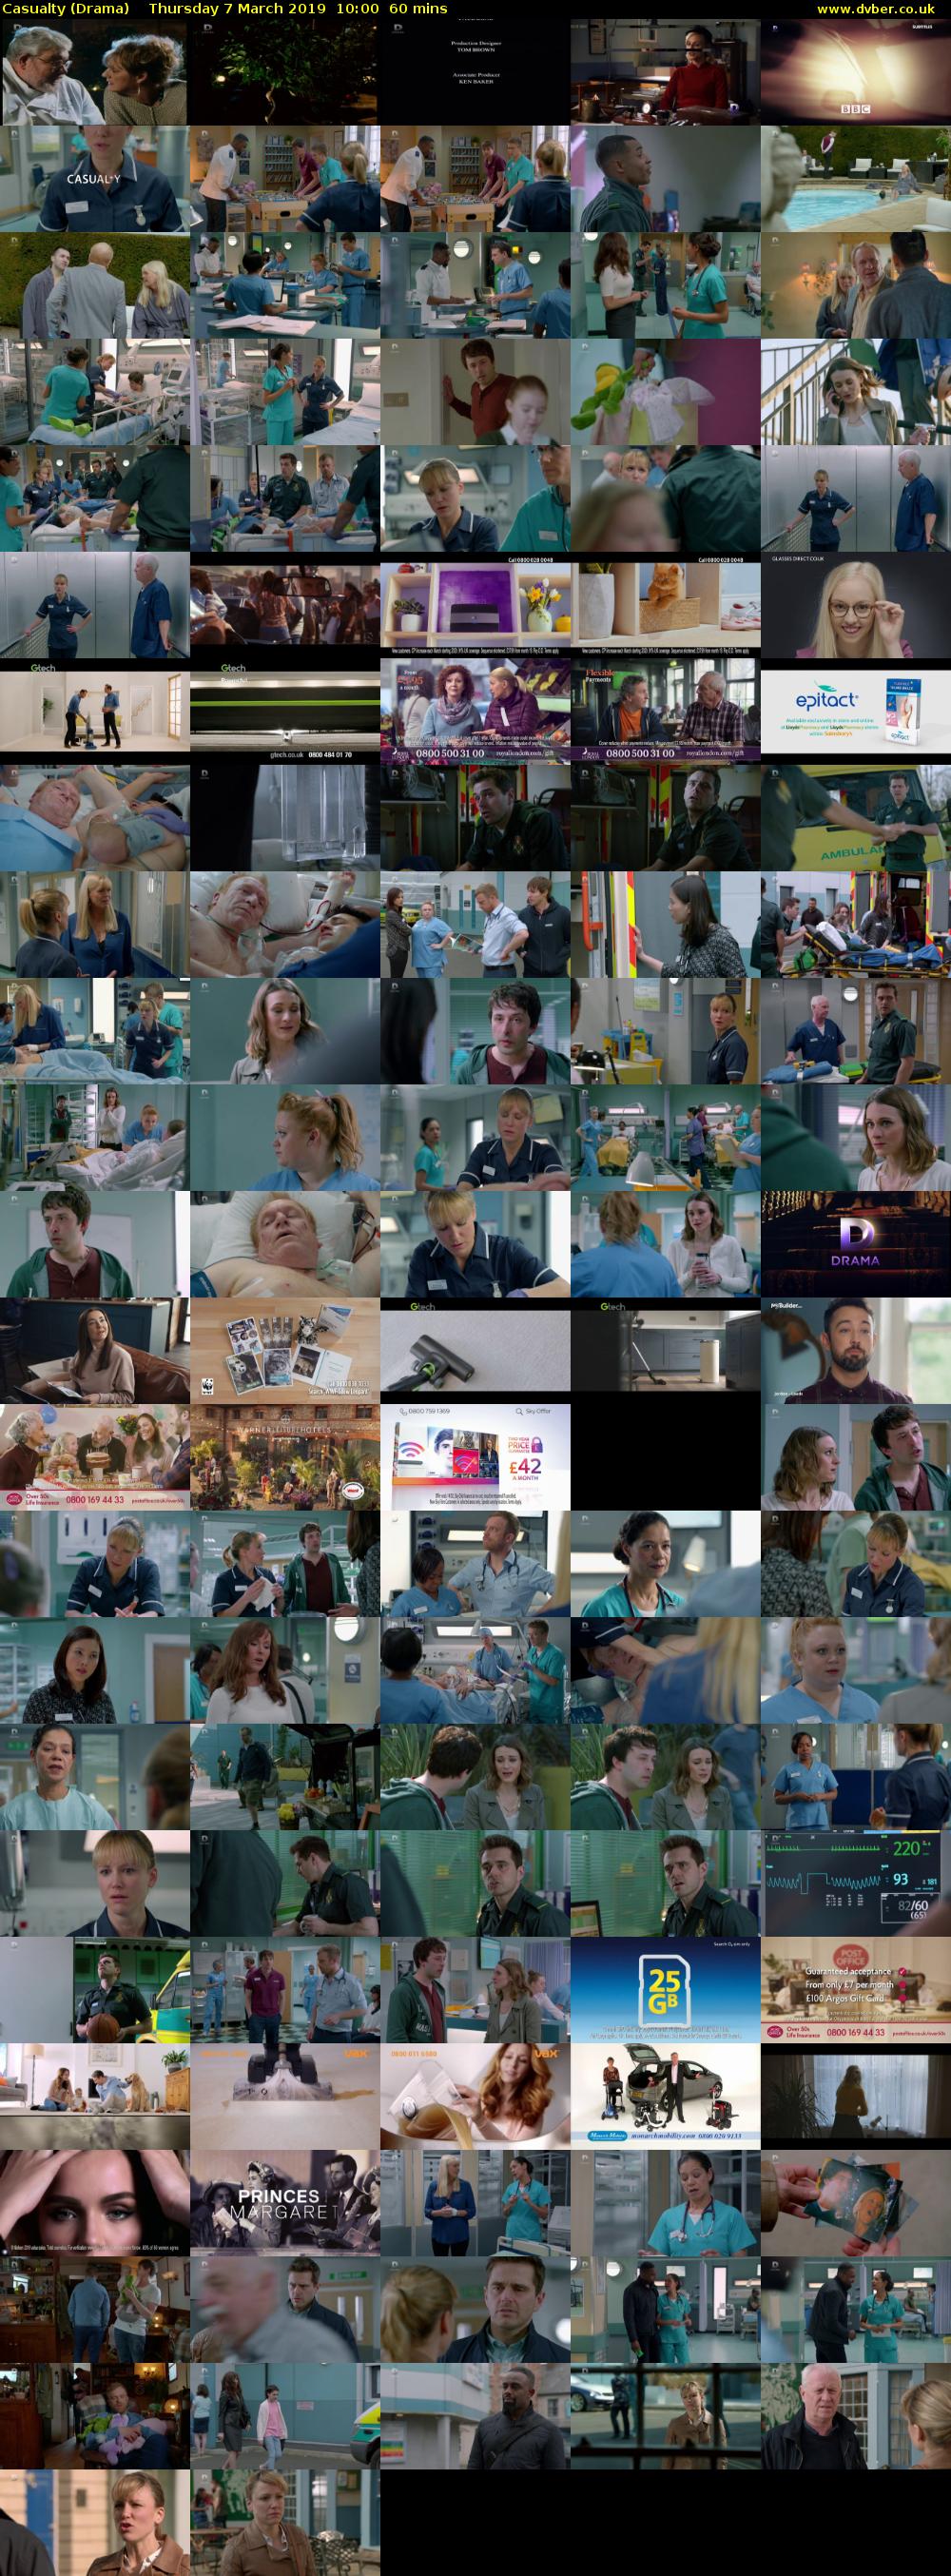 Casualty (Drama) Thursday 7 March 2019 10:00 - 11:00